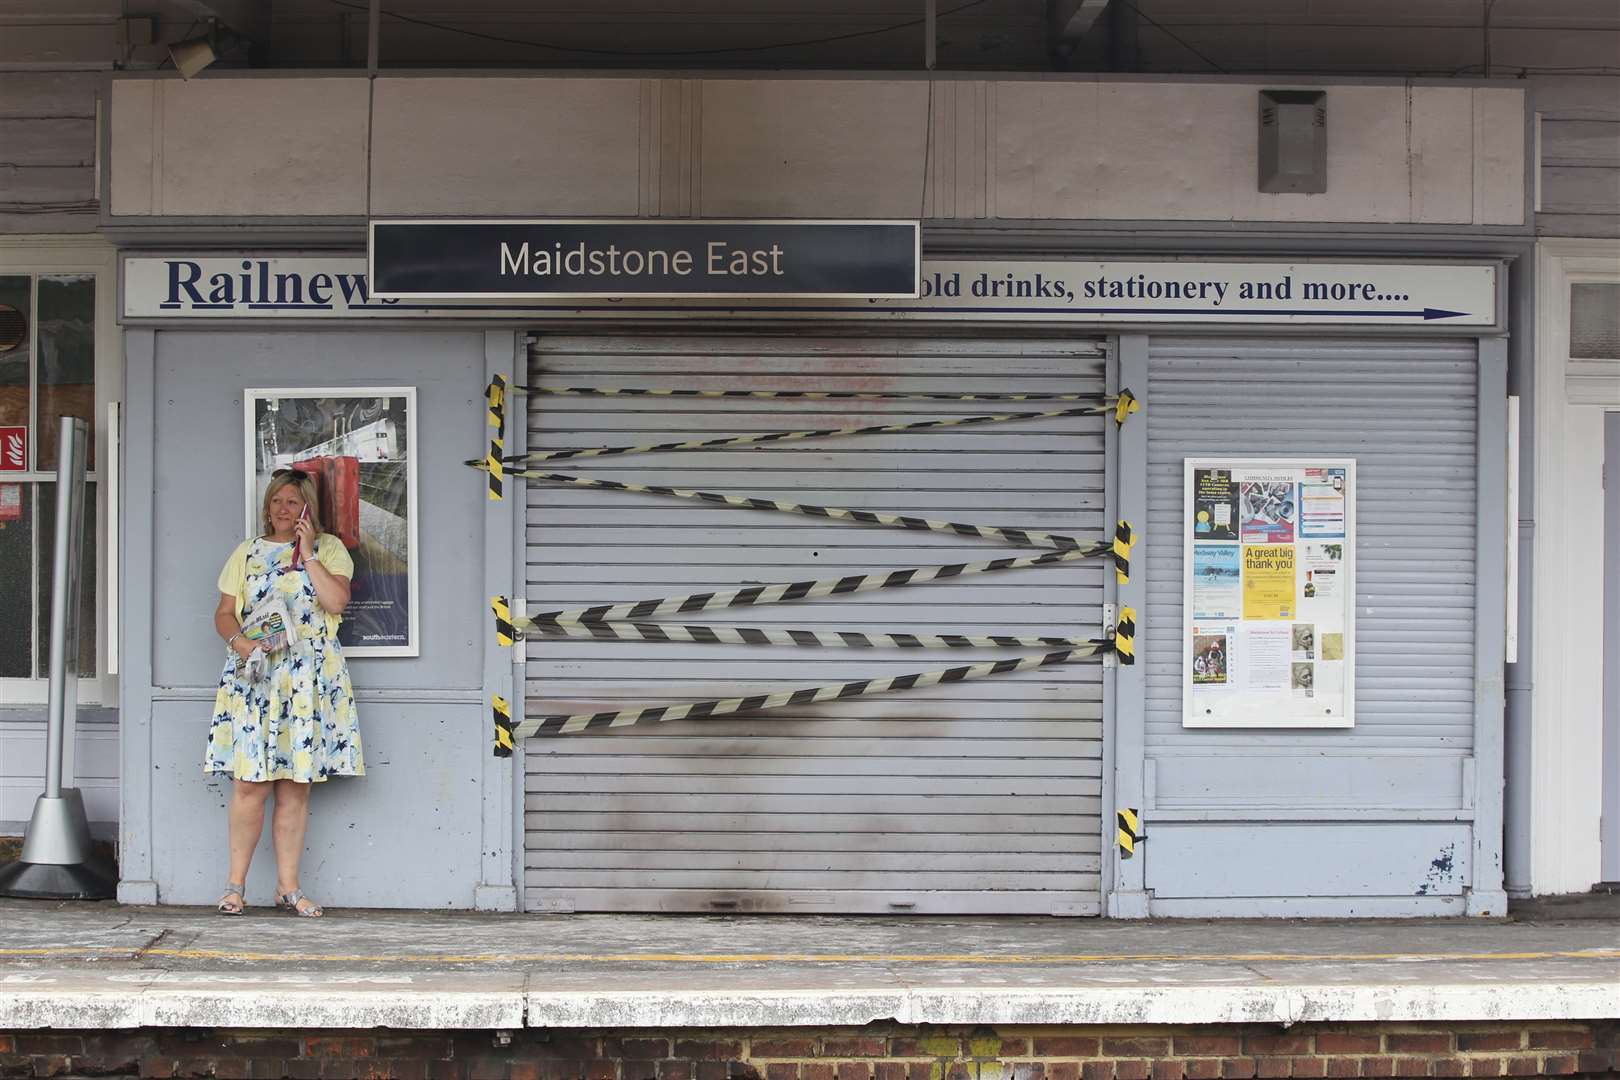 A woman stands next to the fire-damaged newsagents